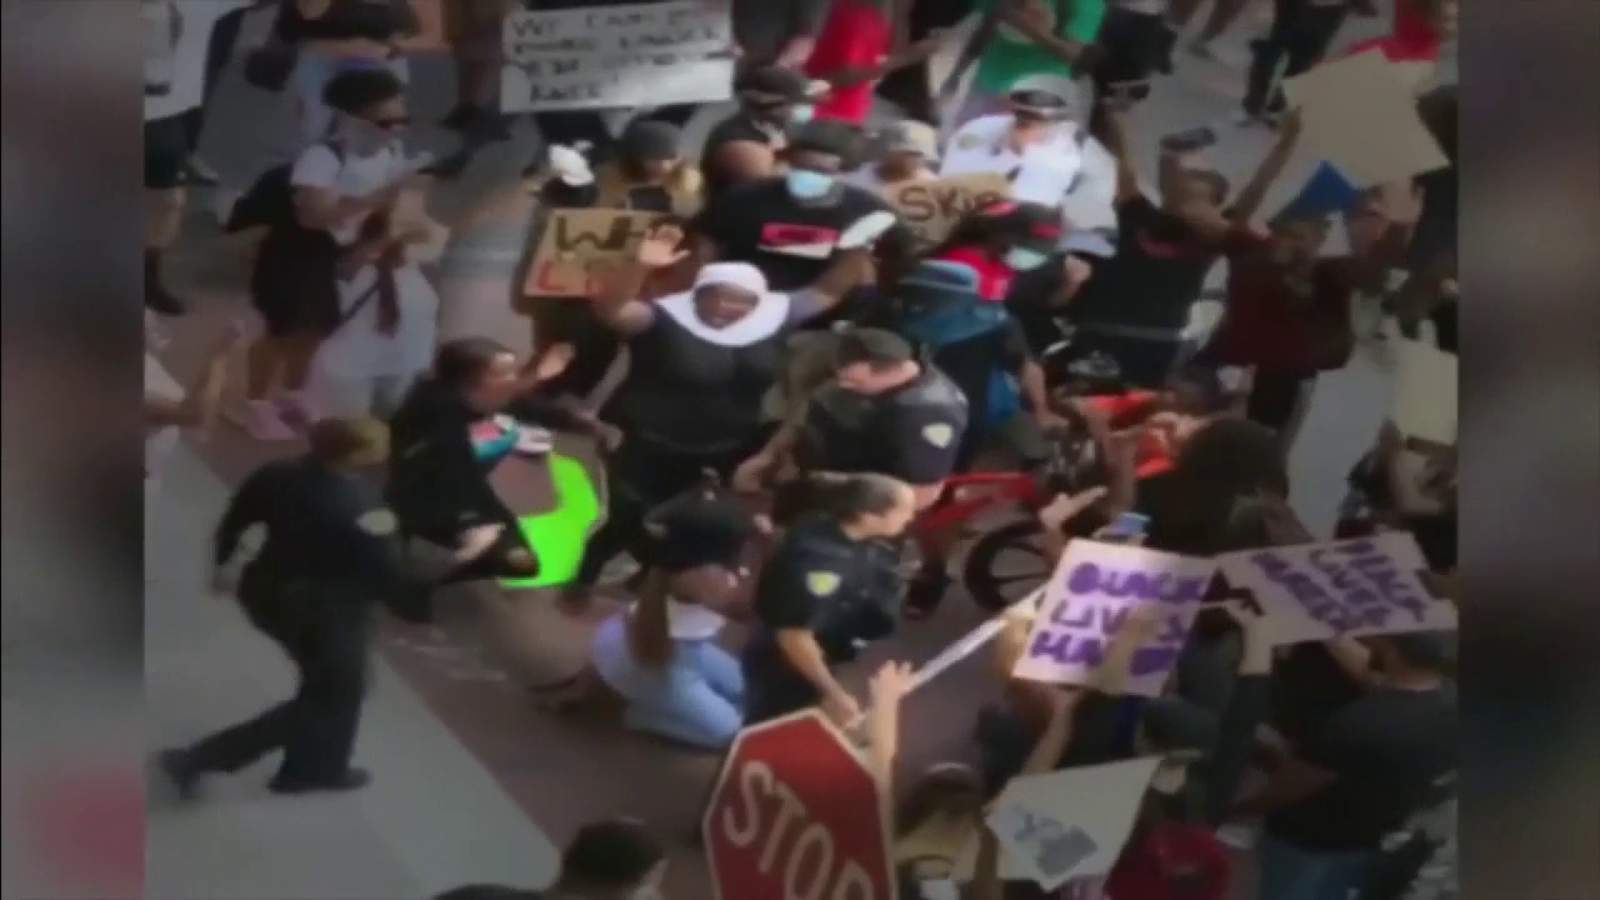 Officer accused of pushing teen during protest has 71 use of force cases on file